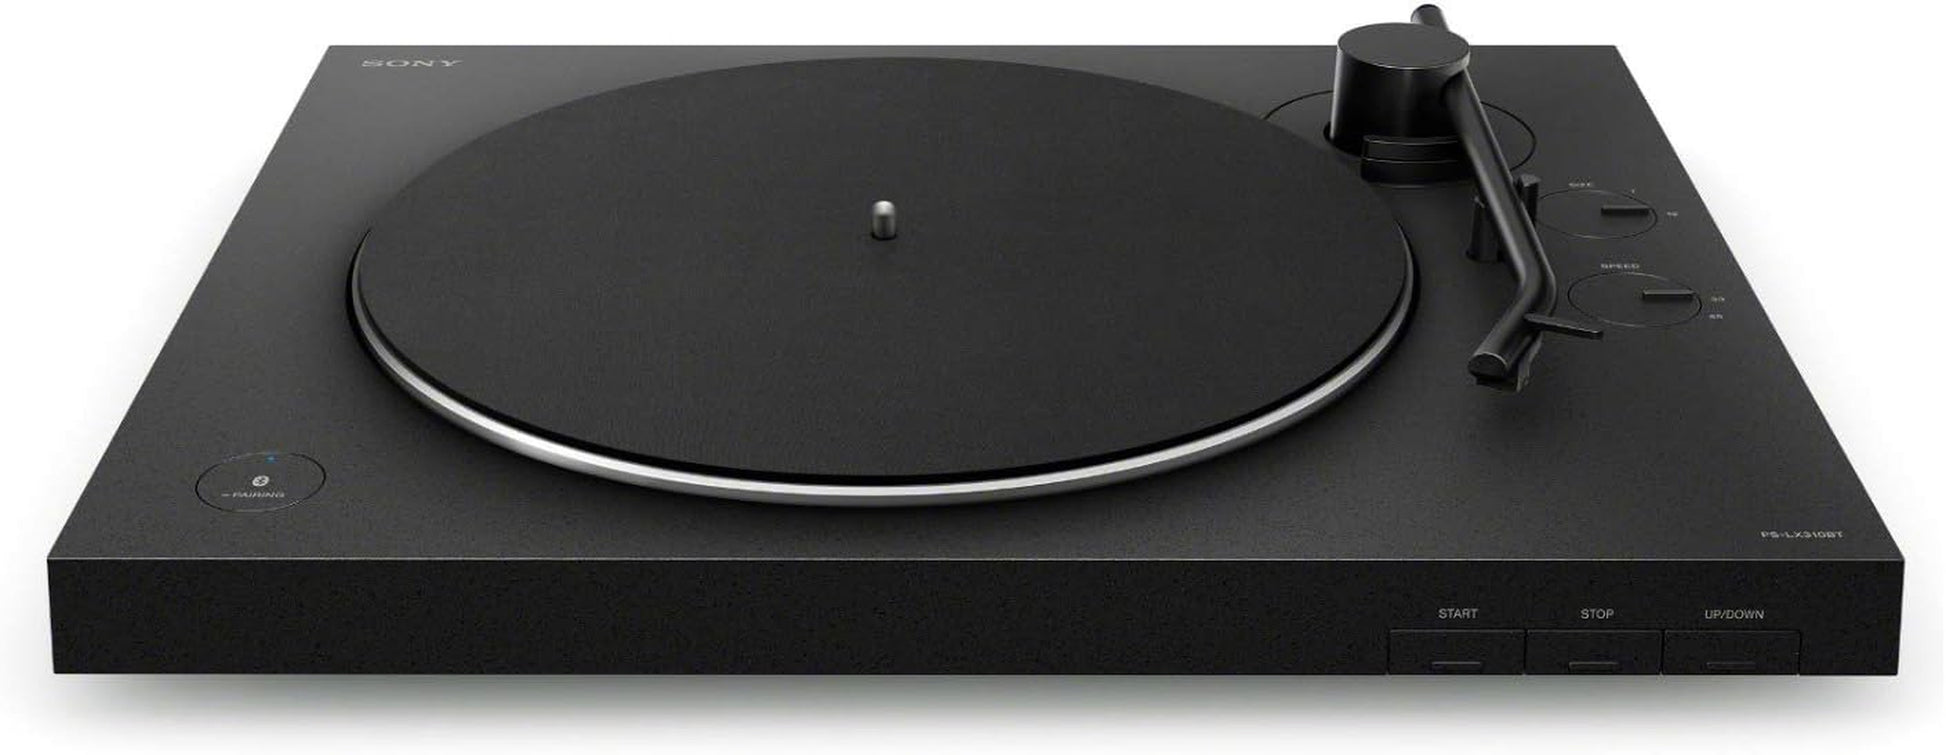 PS-LX310BT Belt Drive Turntable: Fully Automatic Wireless Vinyl Record Player with Bluetooth and USB Output Black